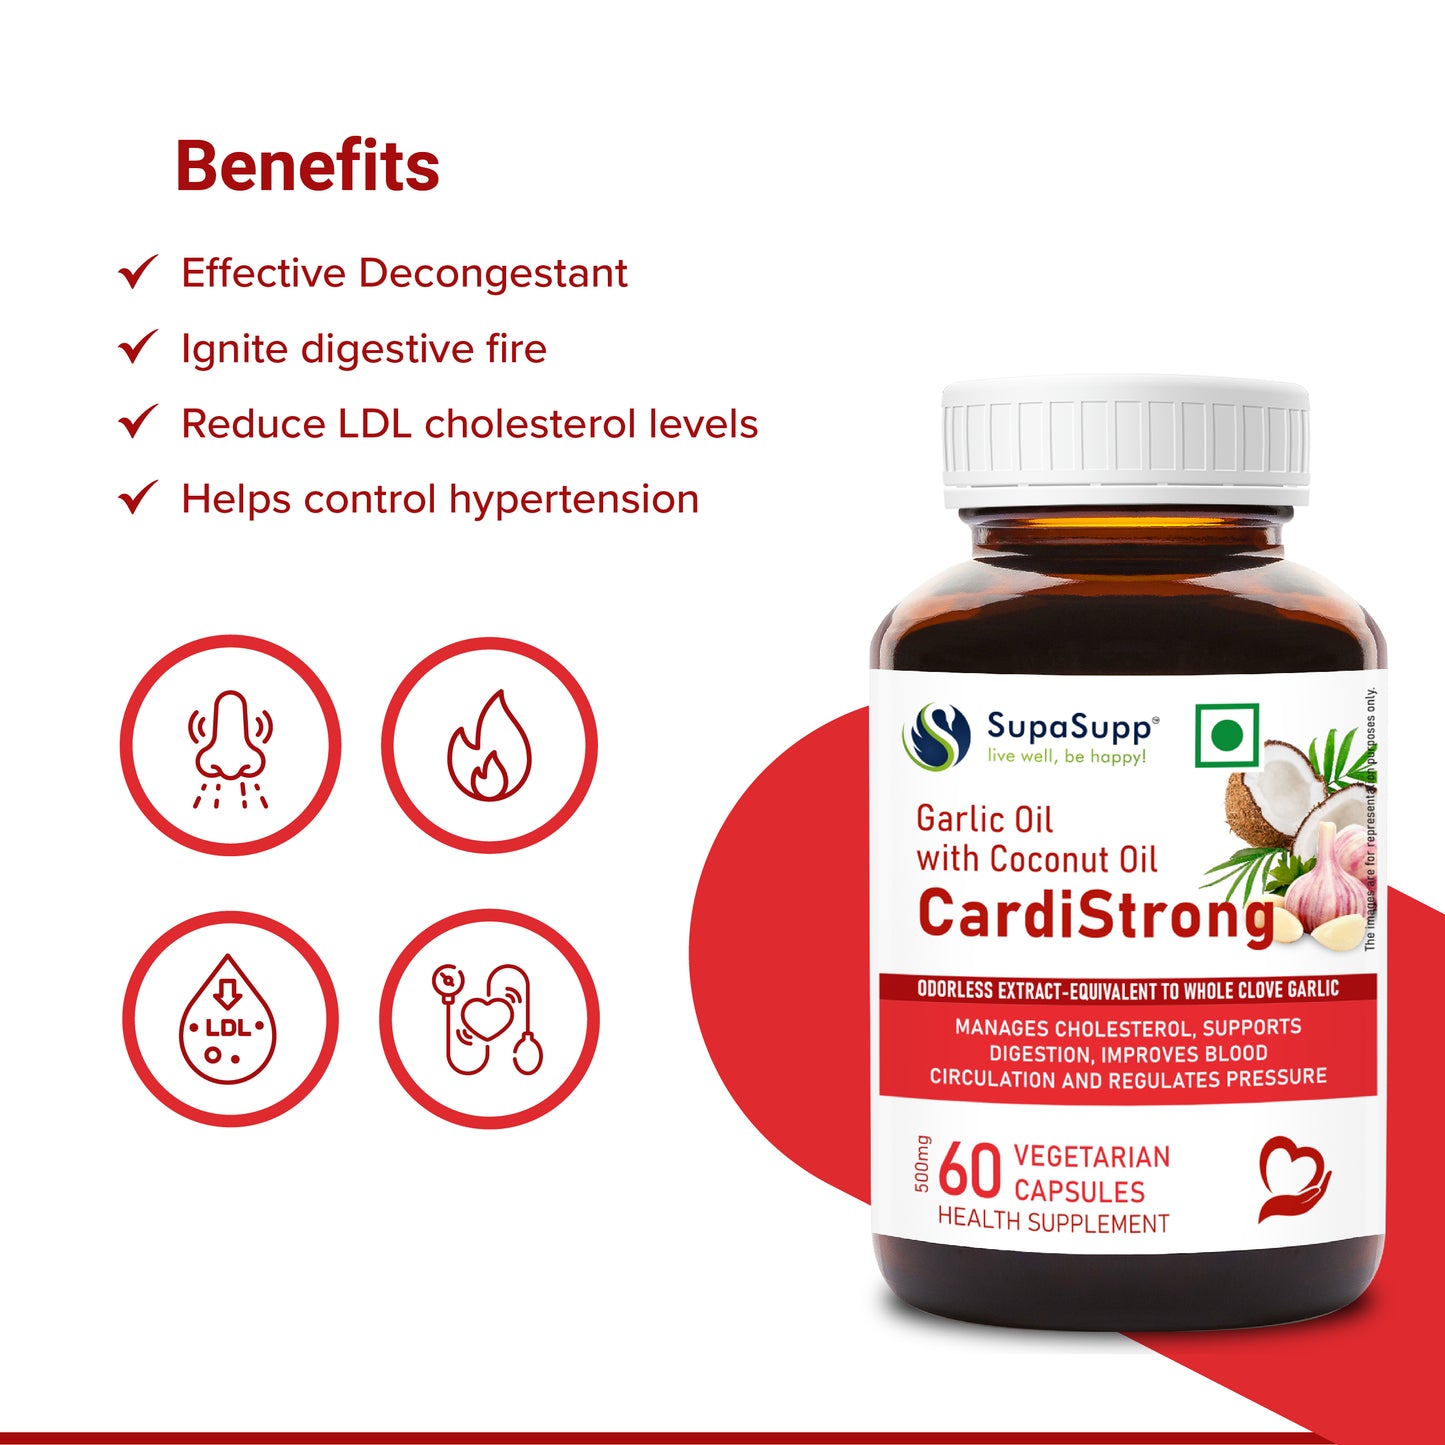 SupaSupp Garlic Oil With Coconut Oil, CardiStrong | Manages Cholesterol, Supports Digestion, Improves Blood Circulation And Regulates Pressure | Health Supplement | 60 Veg Cap, 500 mg